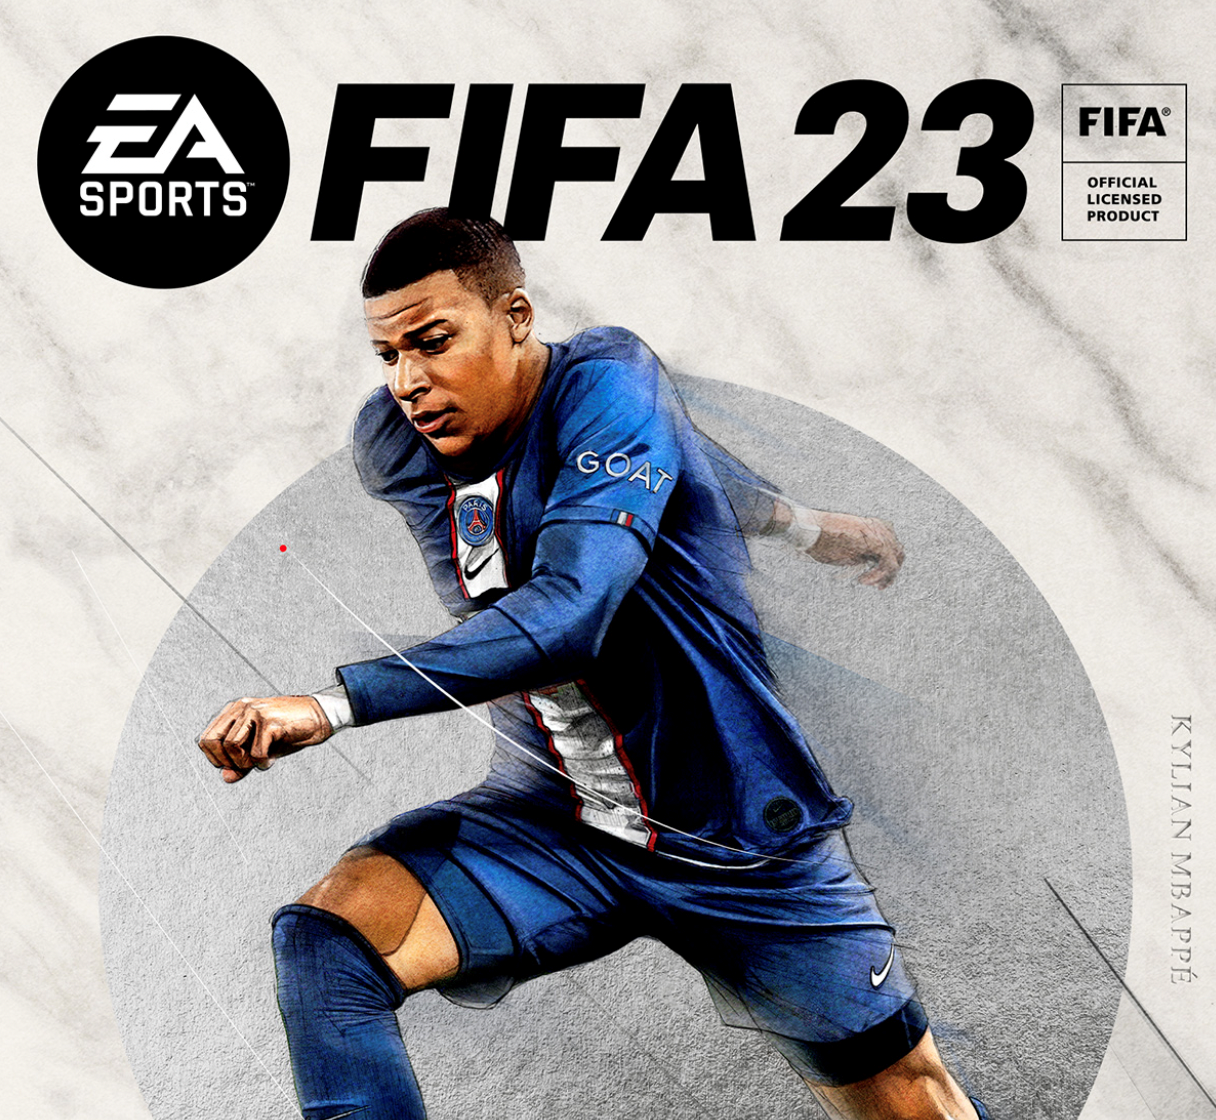 ⚽FIFA 23 ULTIMATE ☘️Steam🏆+WORLD CUP🏆 ✅ГАРАНТИЯ✅